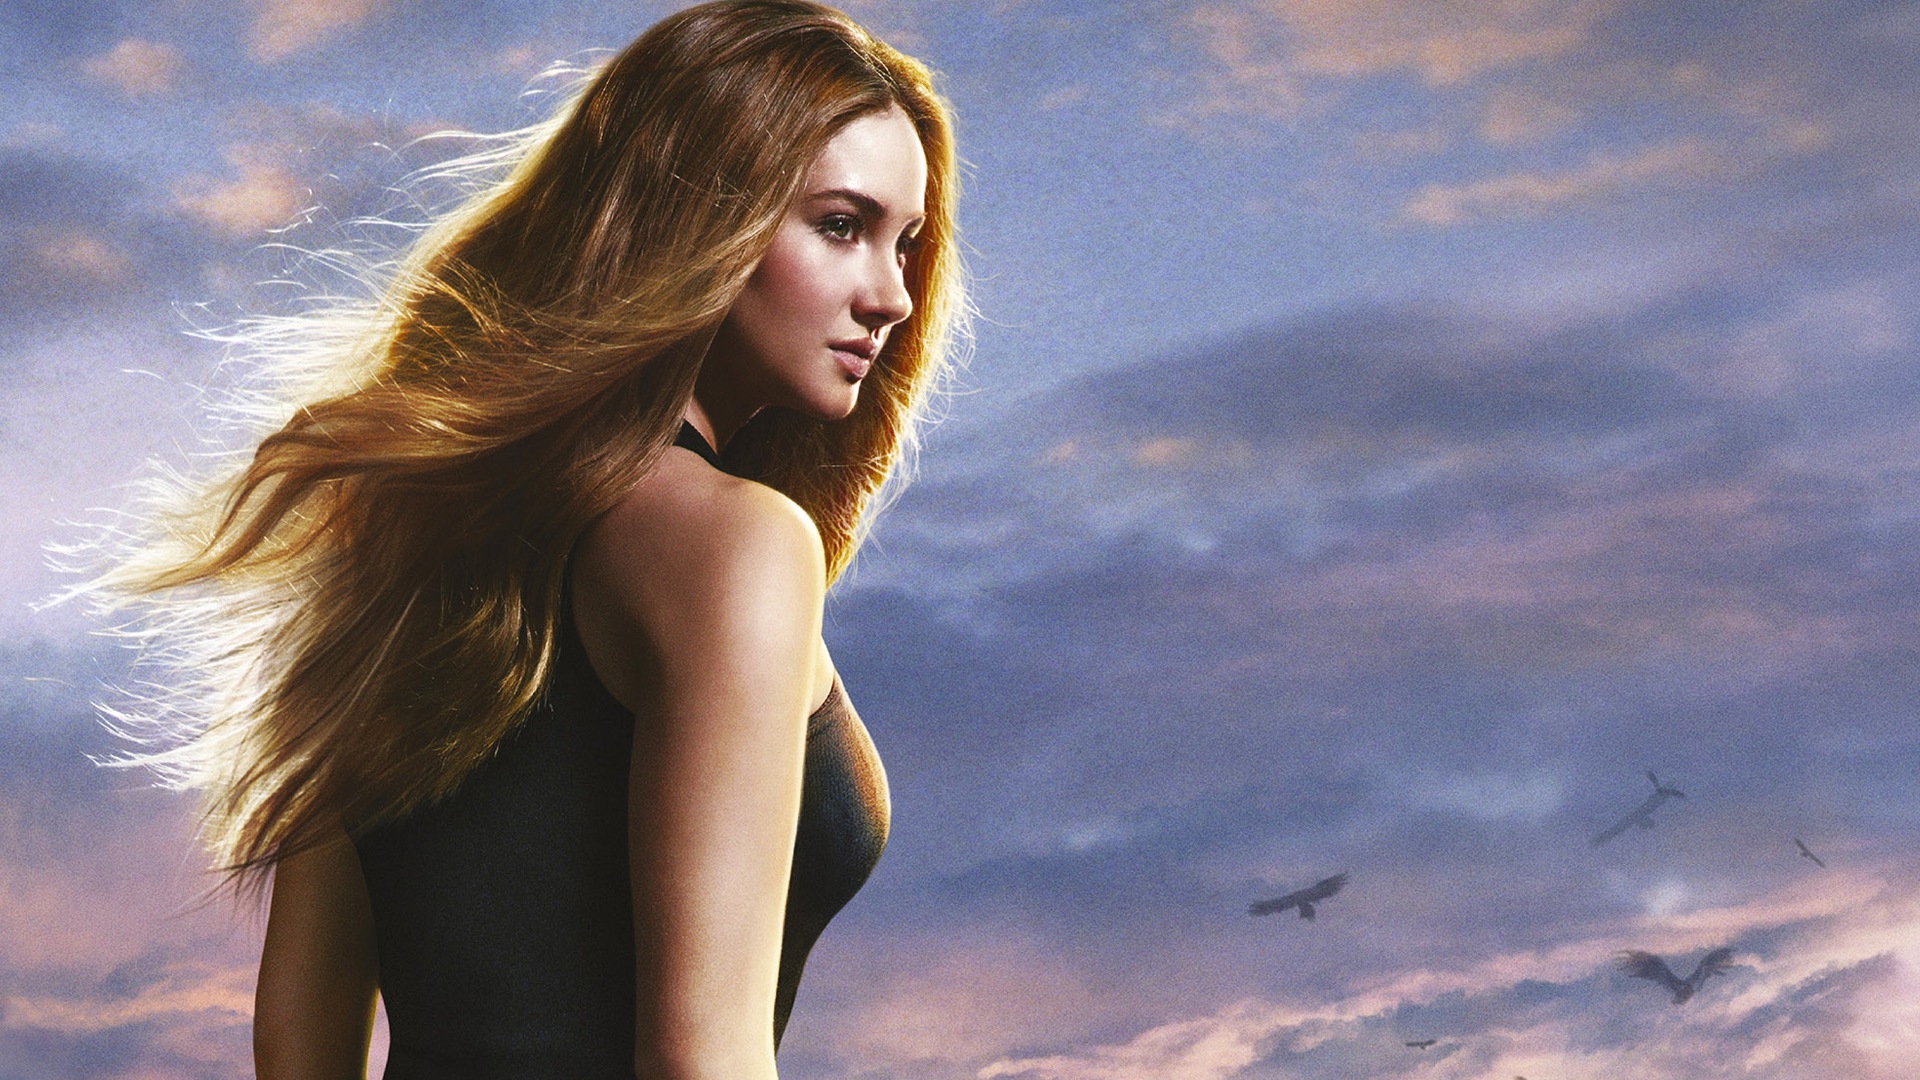 Divergent movie HD wallpapers #11 - 1920x1080